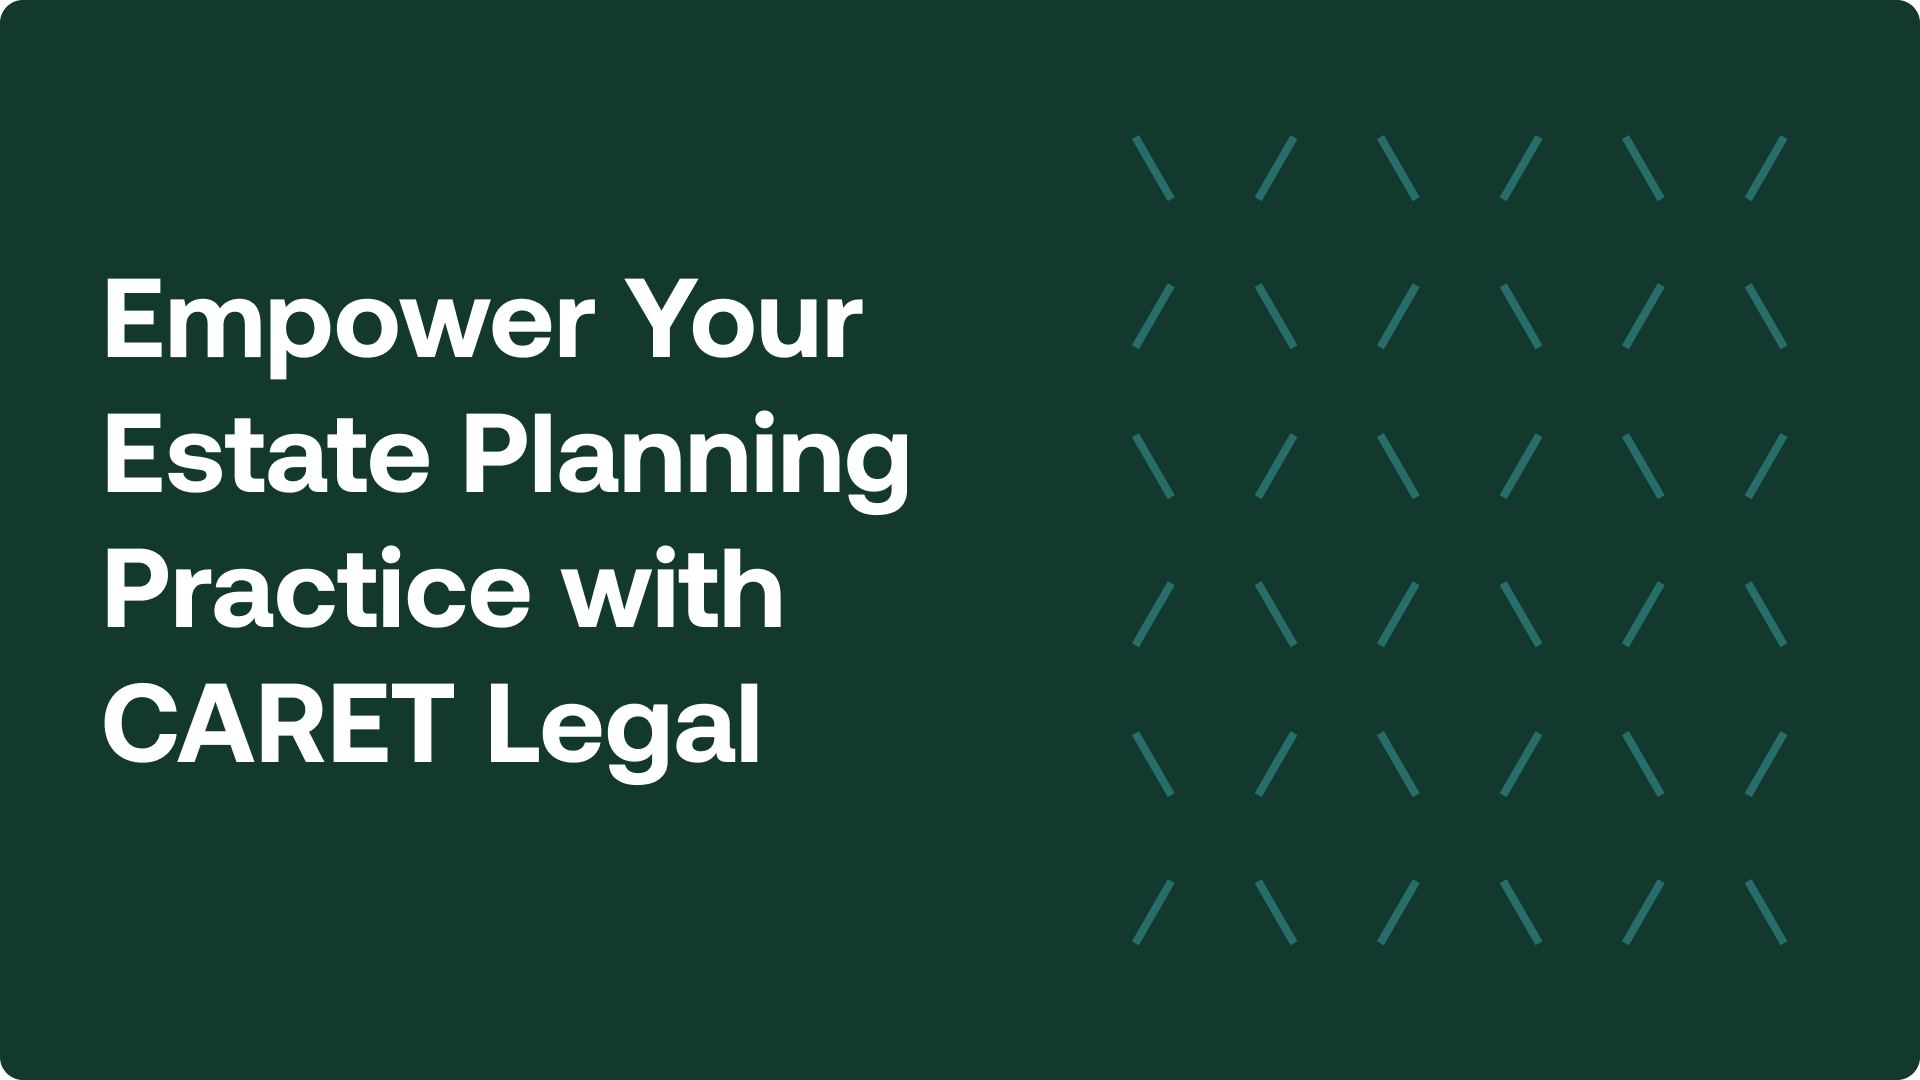 Empower Your Estate Planning Practice with CARET Legal